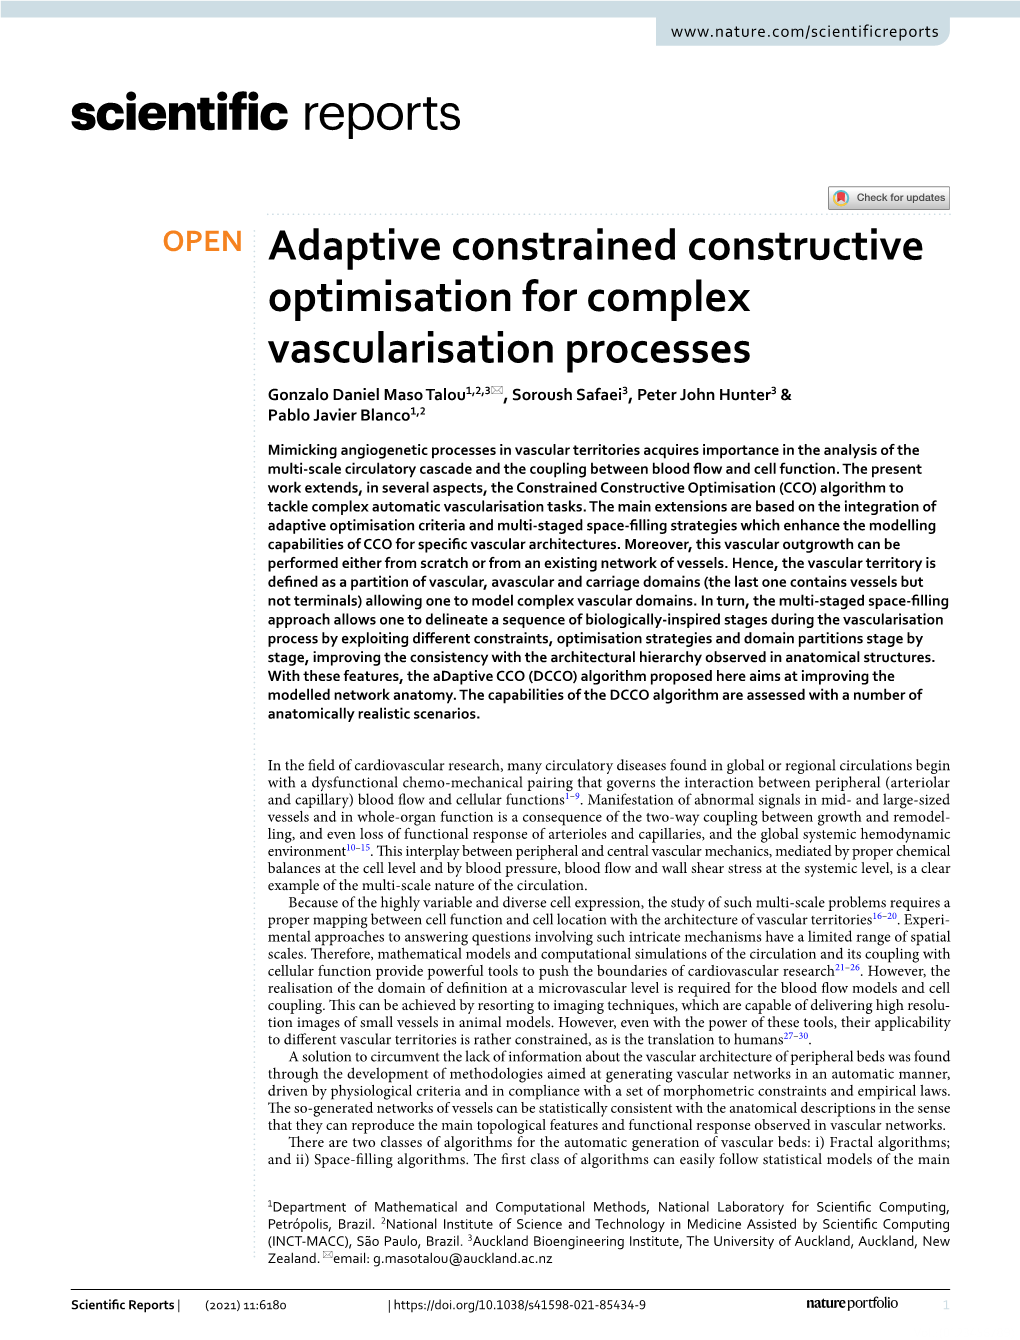 Adaptive Constrained Constructive Optimisation for Complex